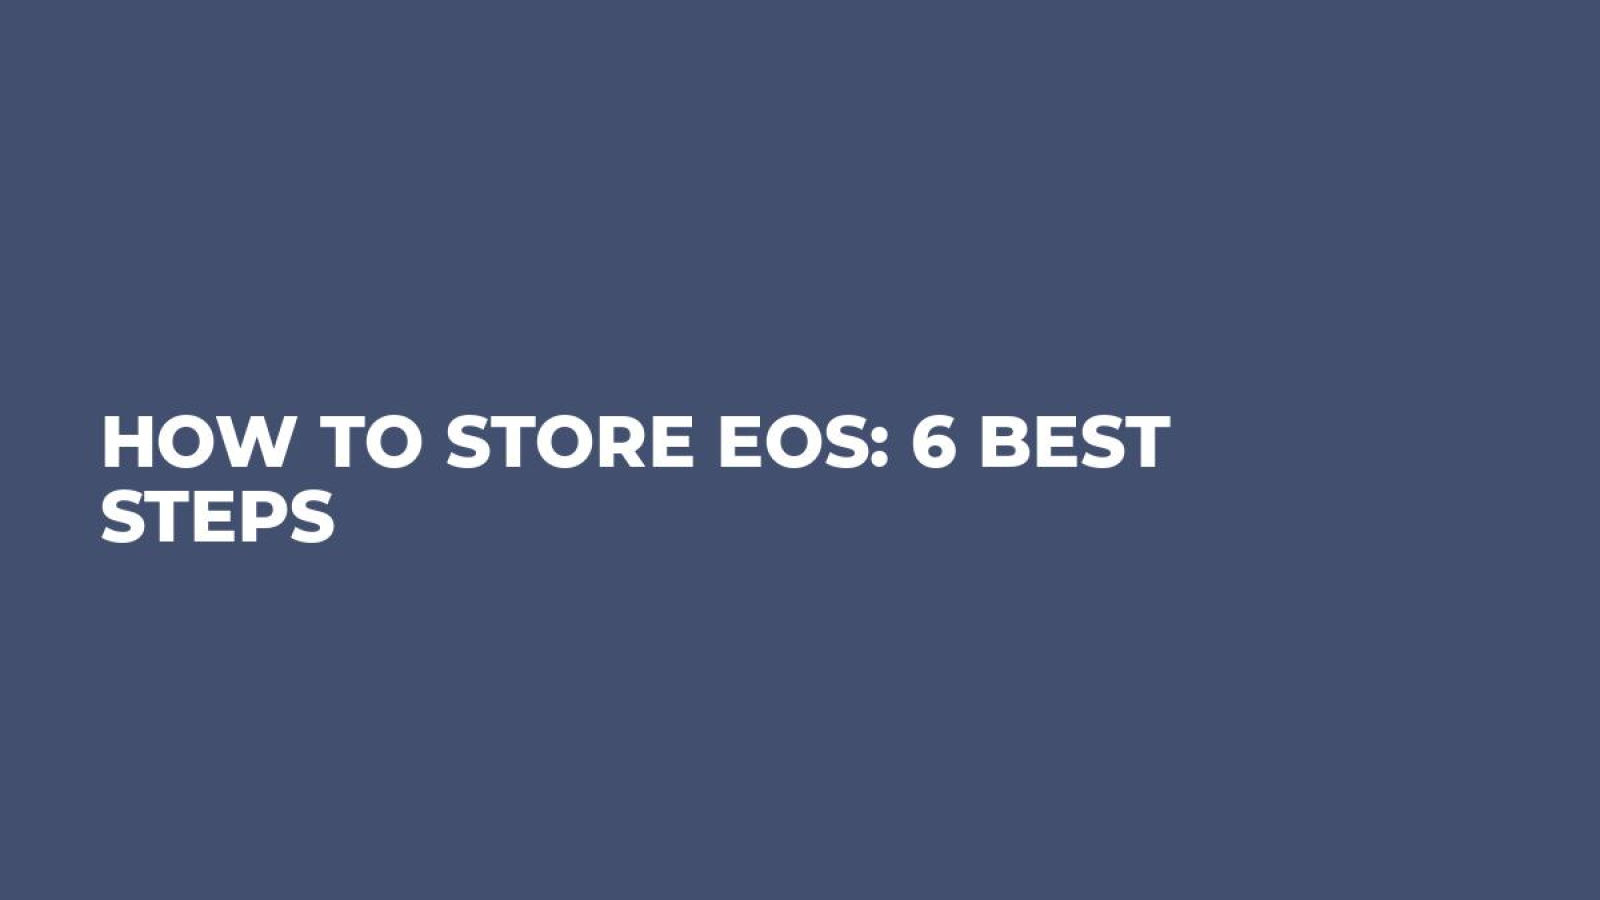 How to store EOS: 6 Best Steps